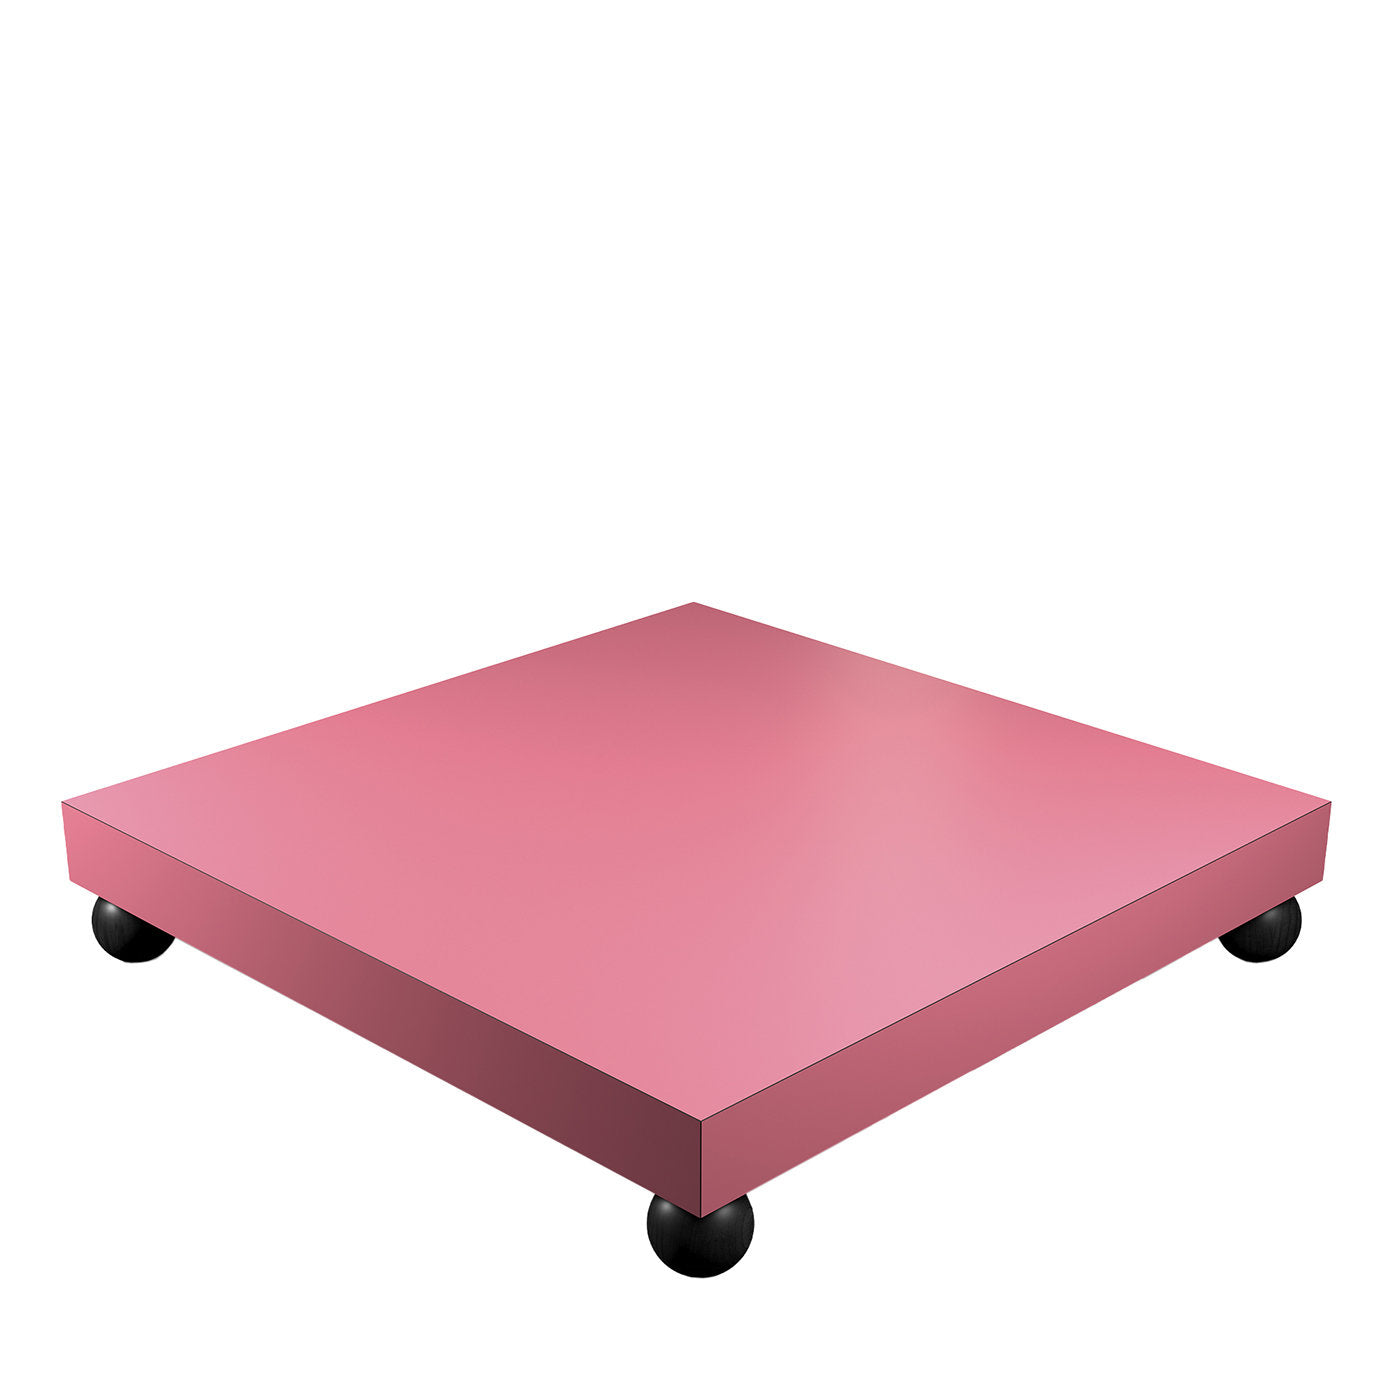 T02 Pink Coffee Table by Superstudio - Main view